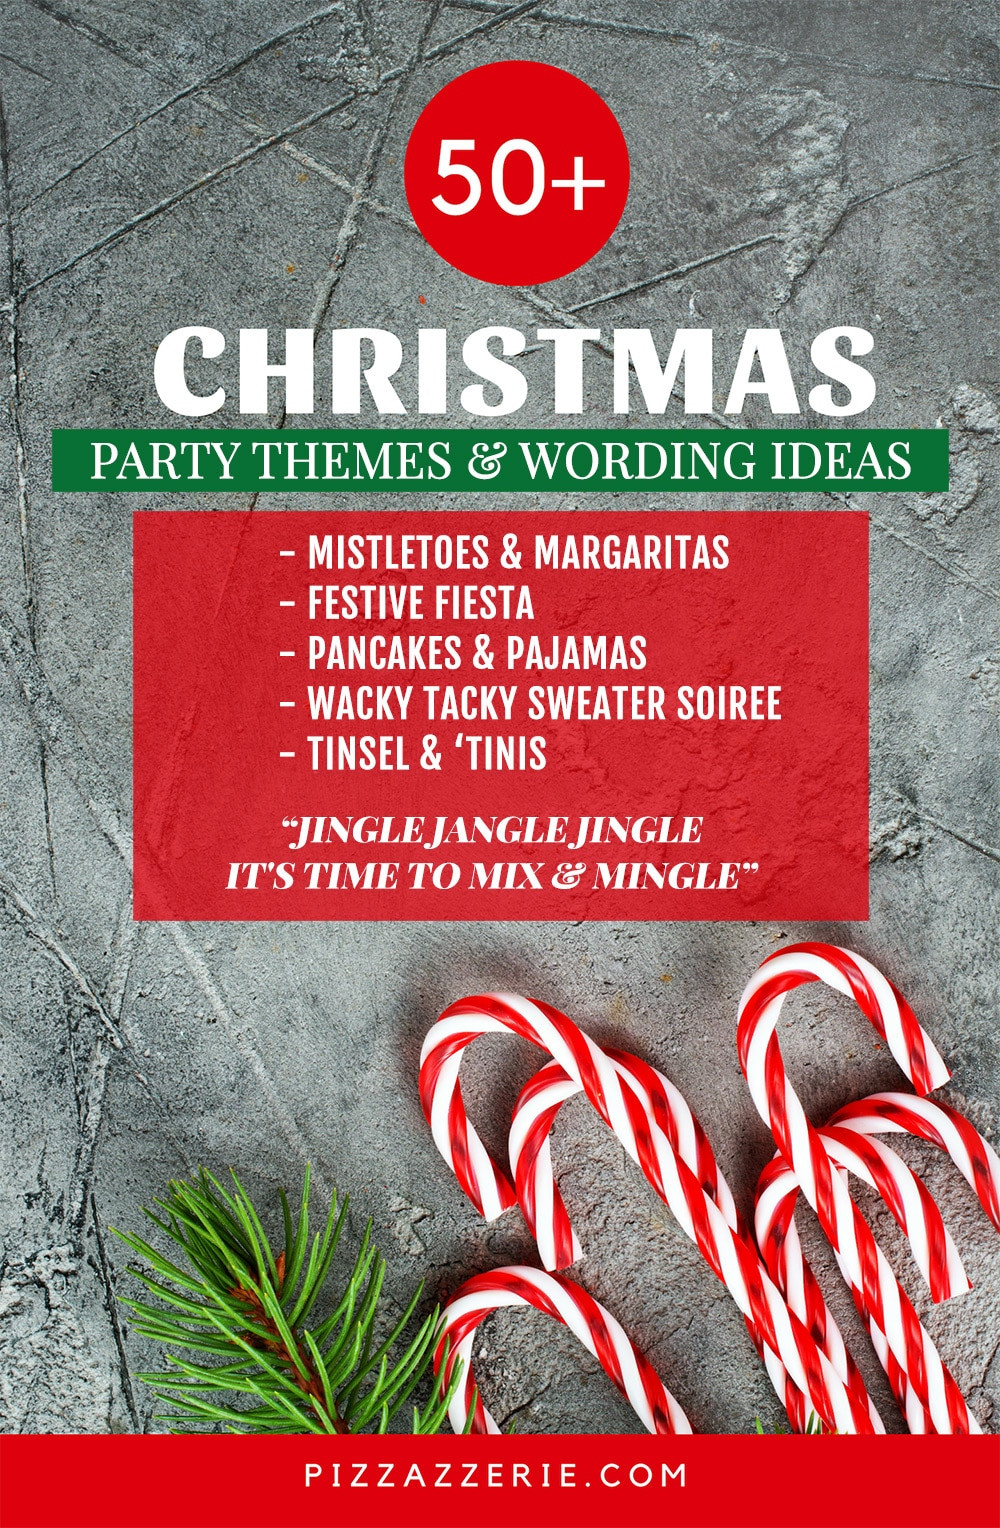 Christmas Party Name Ideas
 50 CHRISTMAS PARTY THEMES & CLEVER INVITATION WORDING